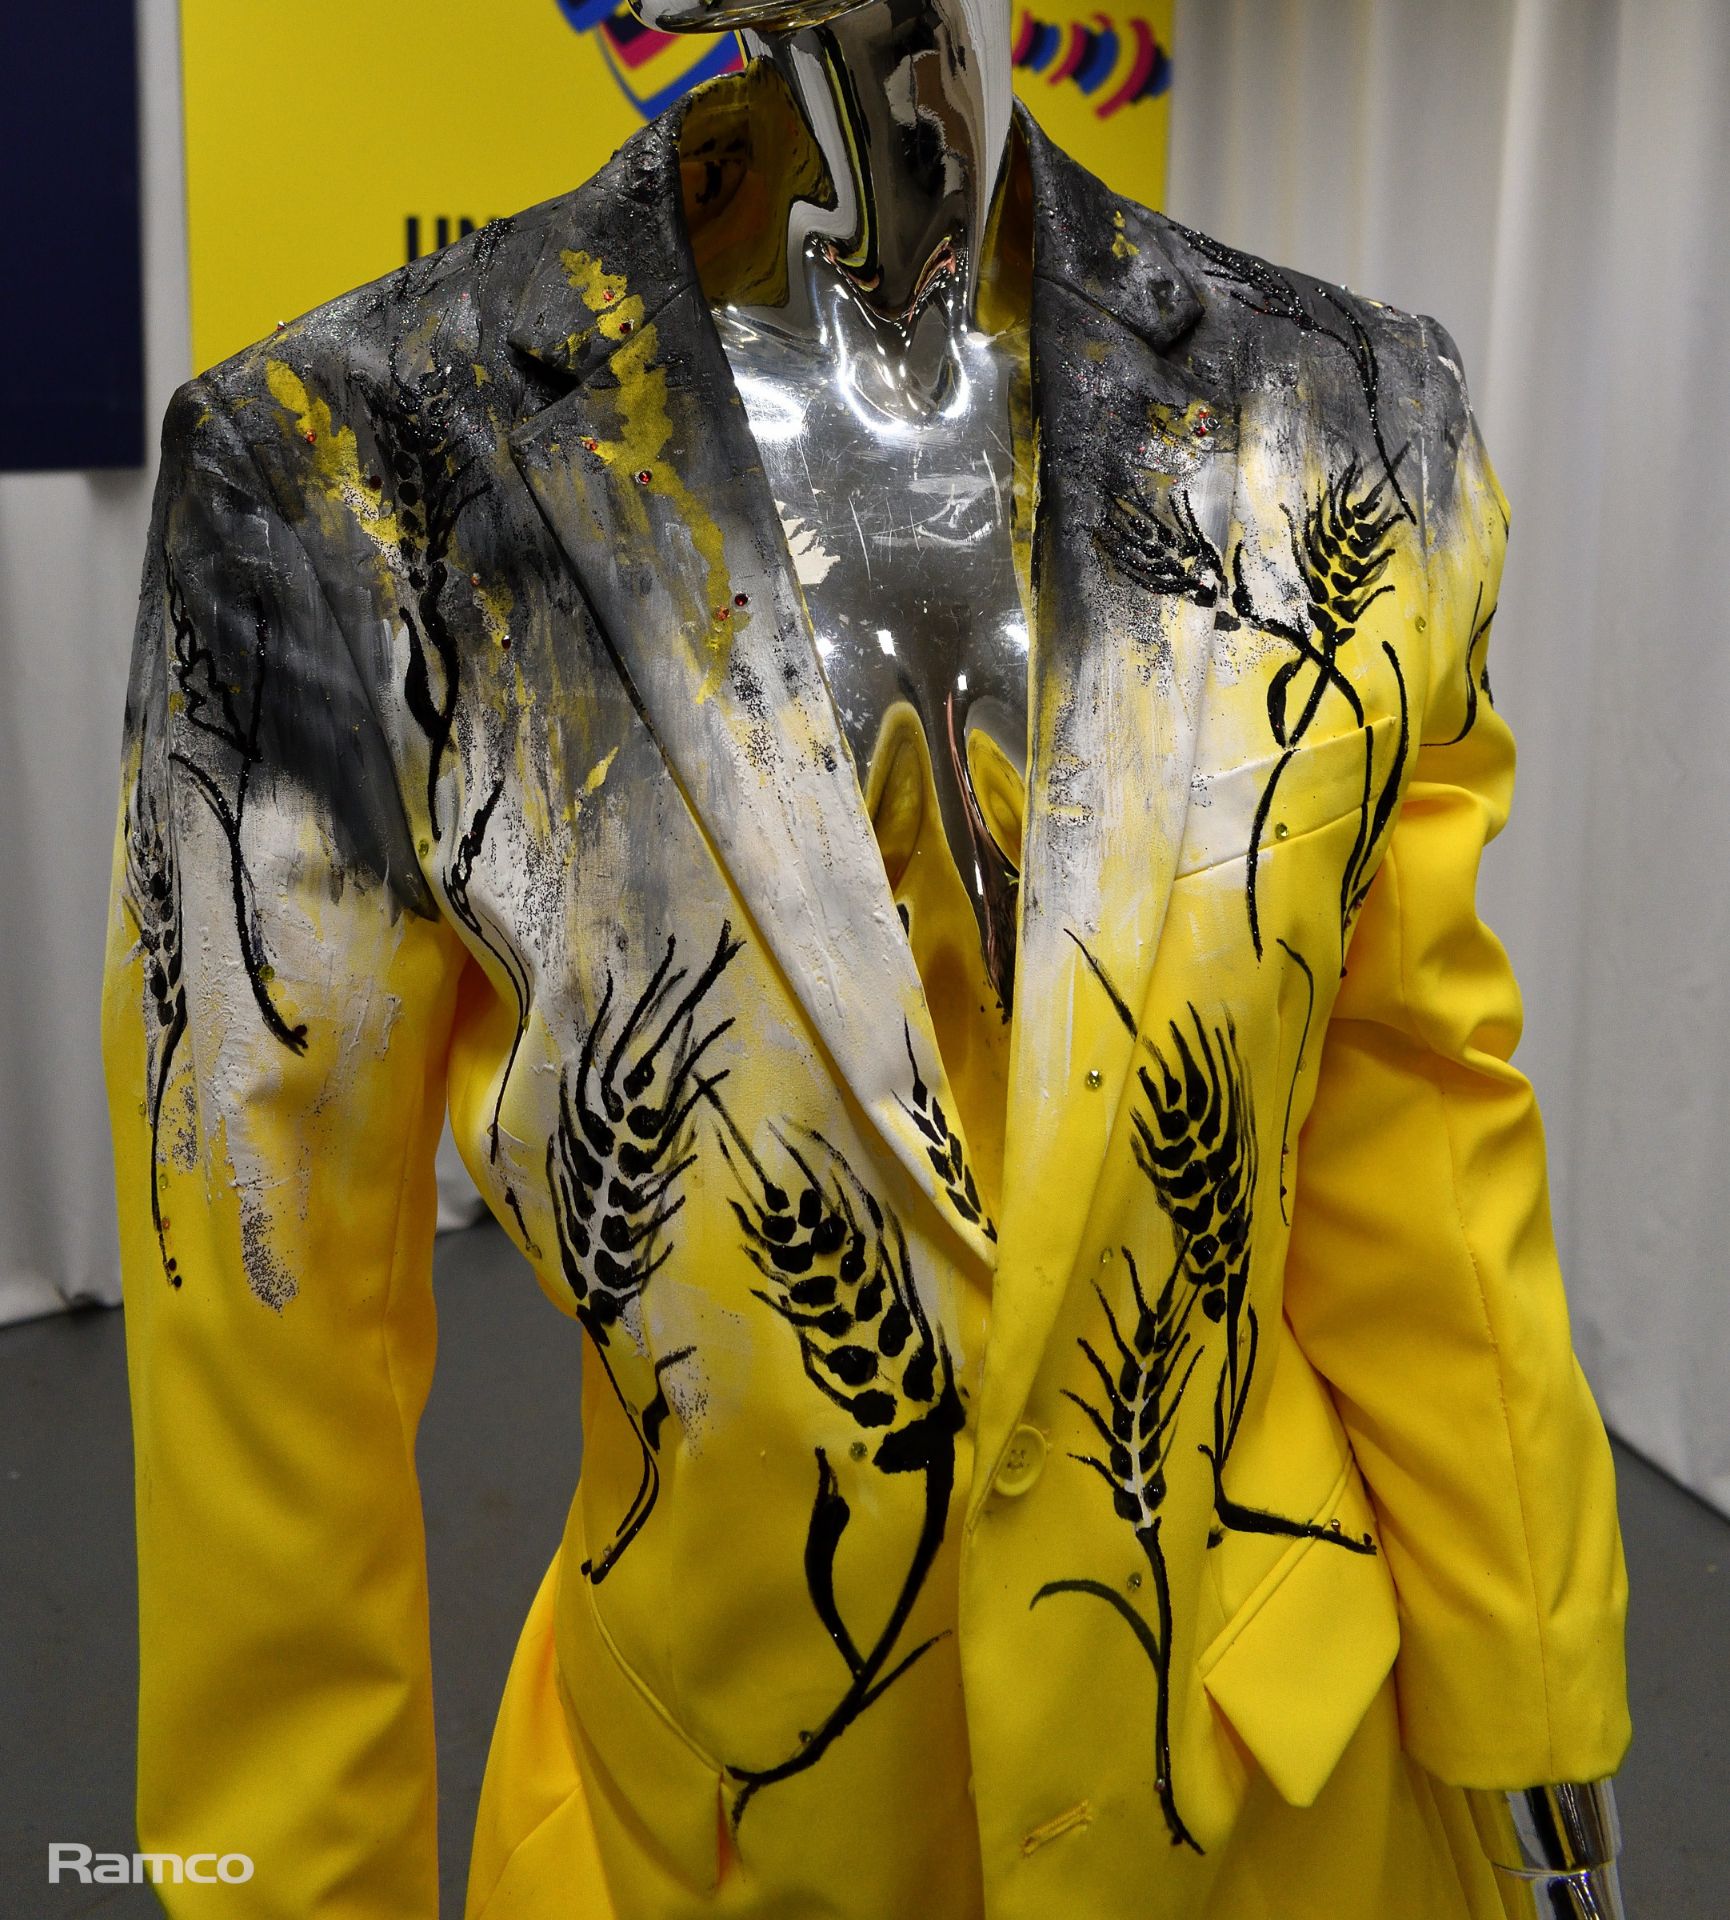 Yellow Outfits worn by backing dancers during the United by Music performance by Mariya Yaremchuck - Image 4 of 15